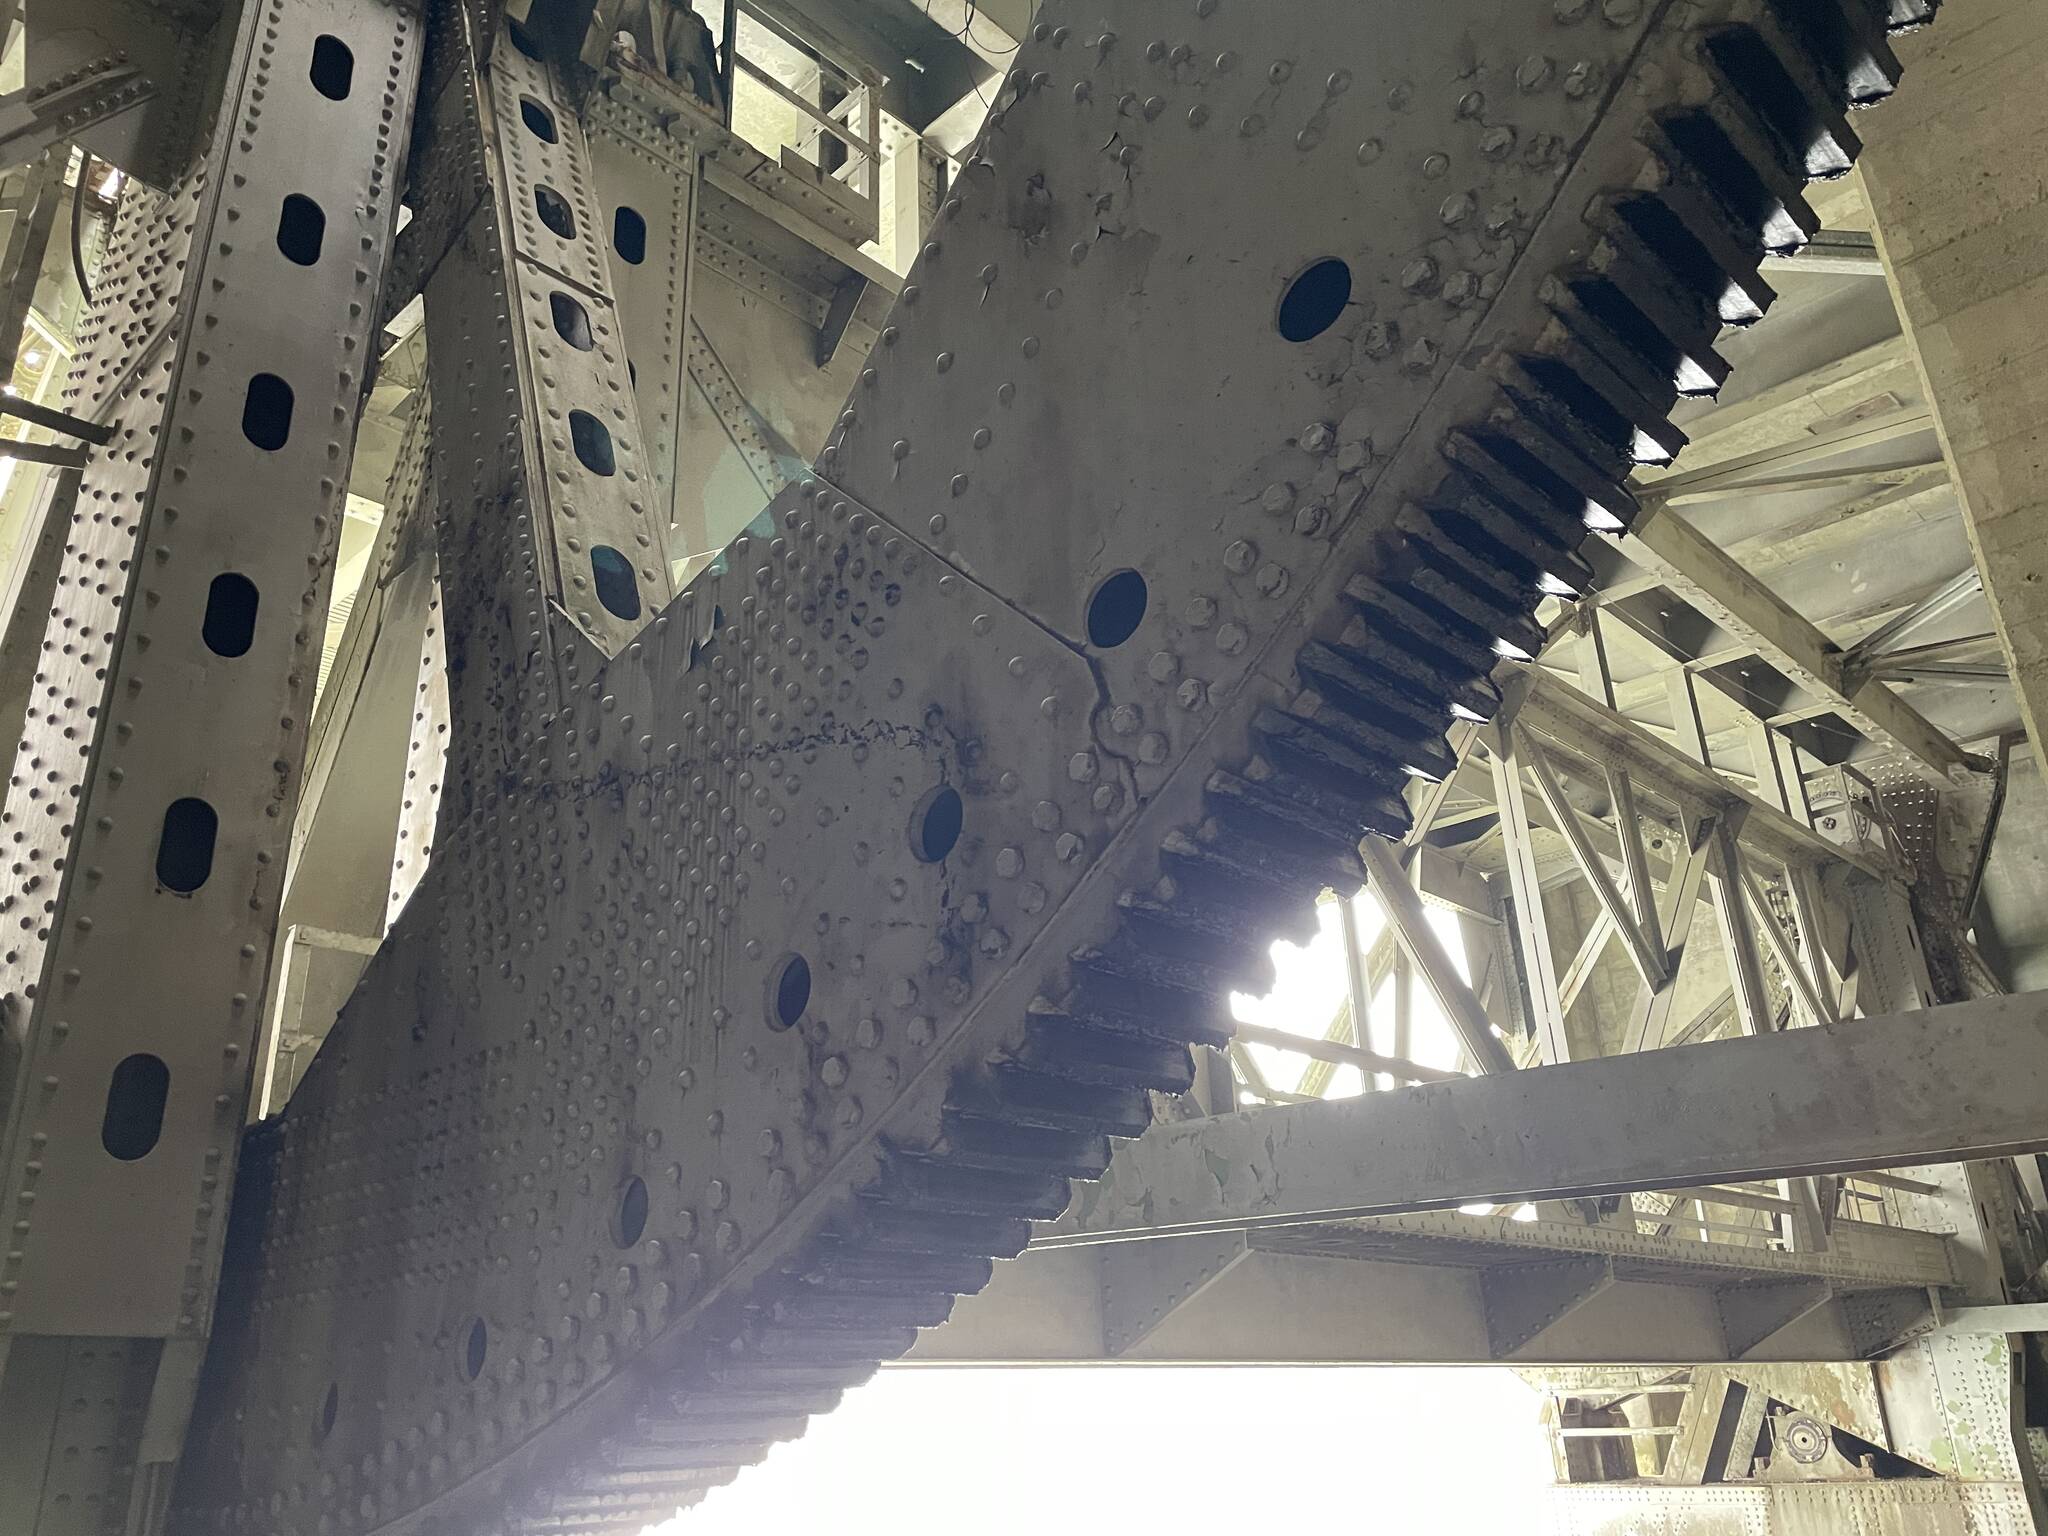 Michael S. Lockett / The Daily World
The massive gearing system that operates the Chehalis River Bridge lies dormant on May 16, waiting to lift the huge drawbridge with a counterweight of more than 2,600 tons.